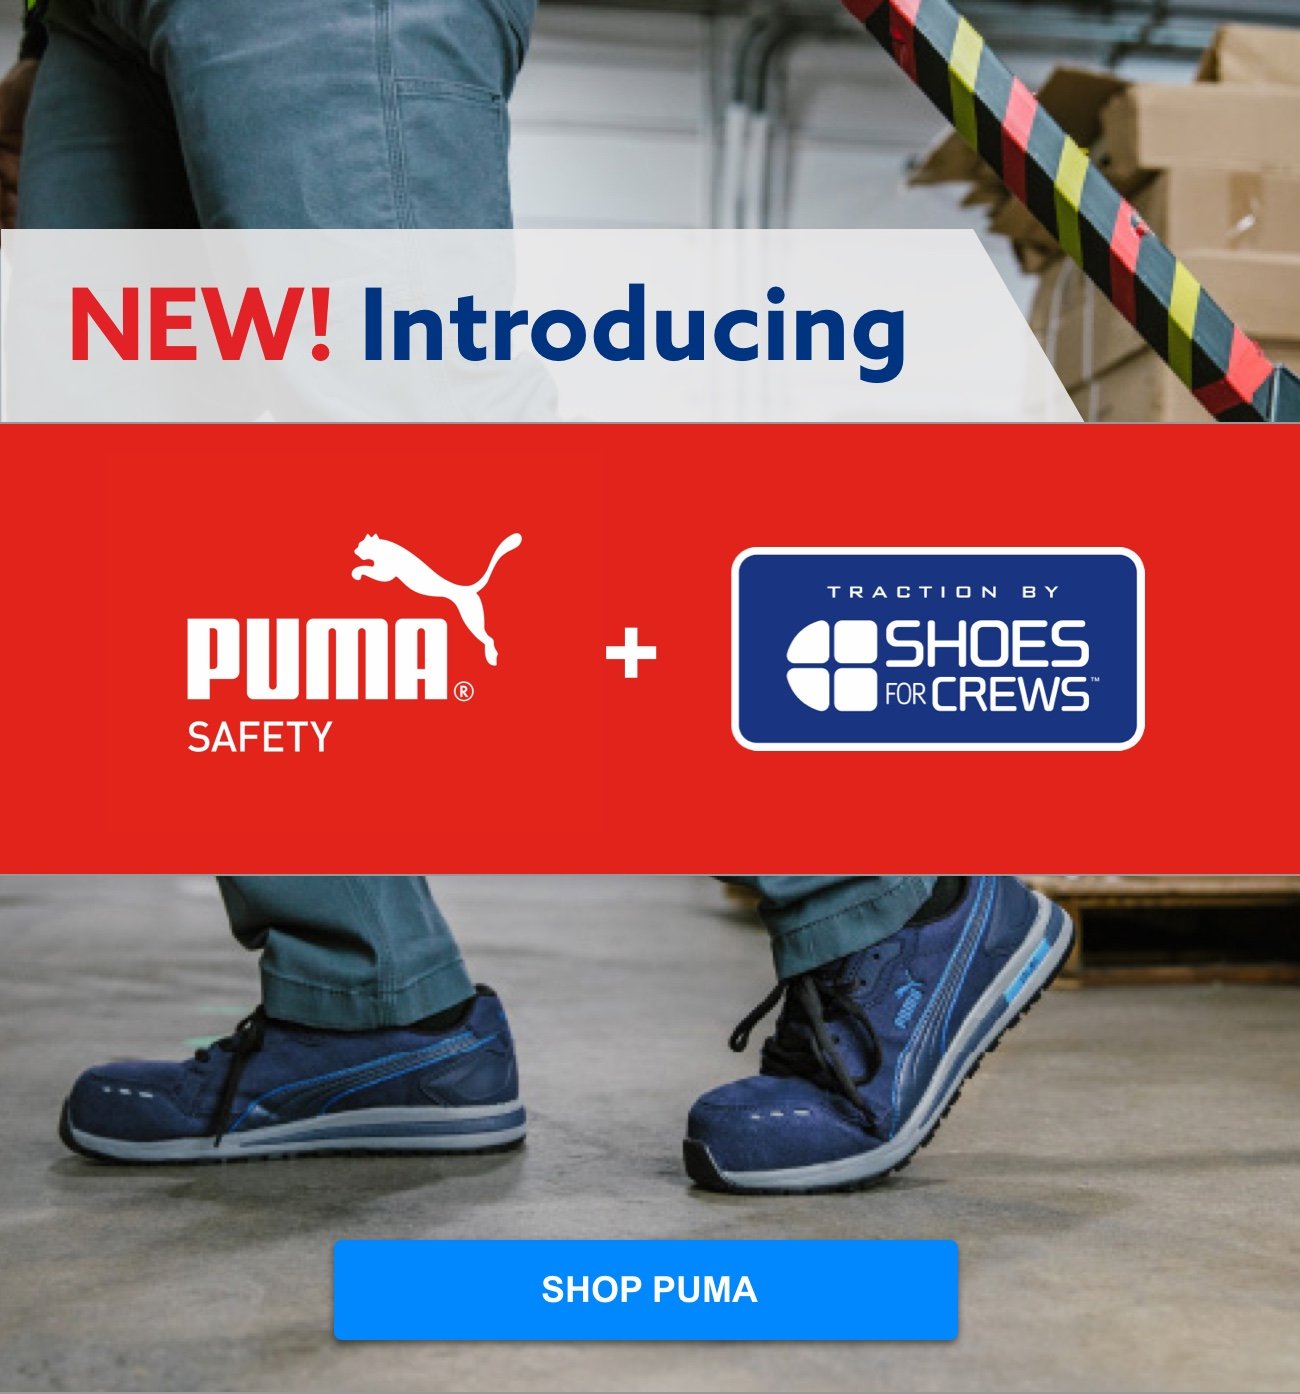 Introducing Puma Safety + Shoes For Crews.